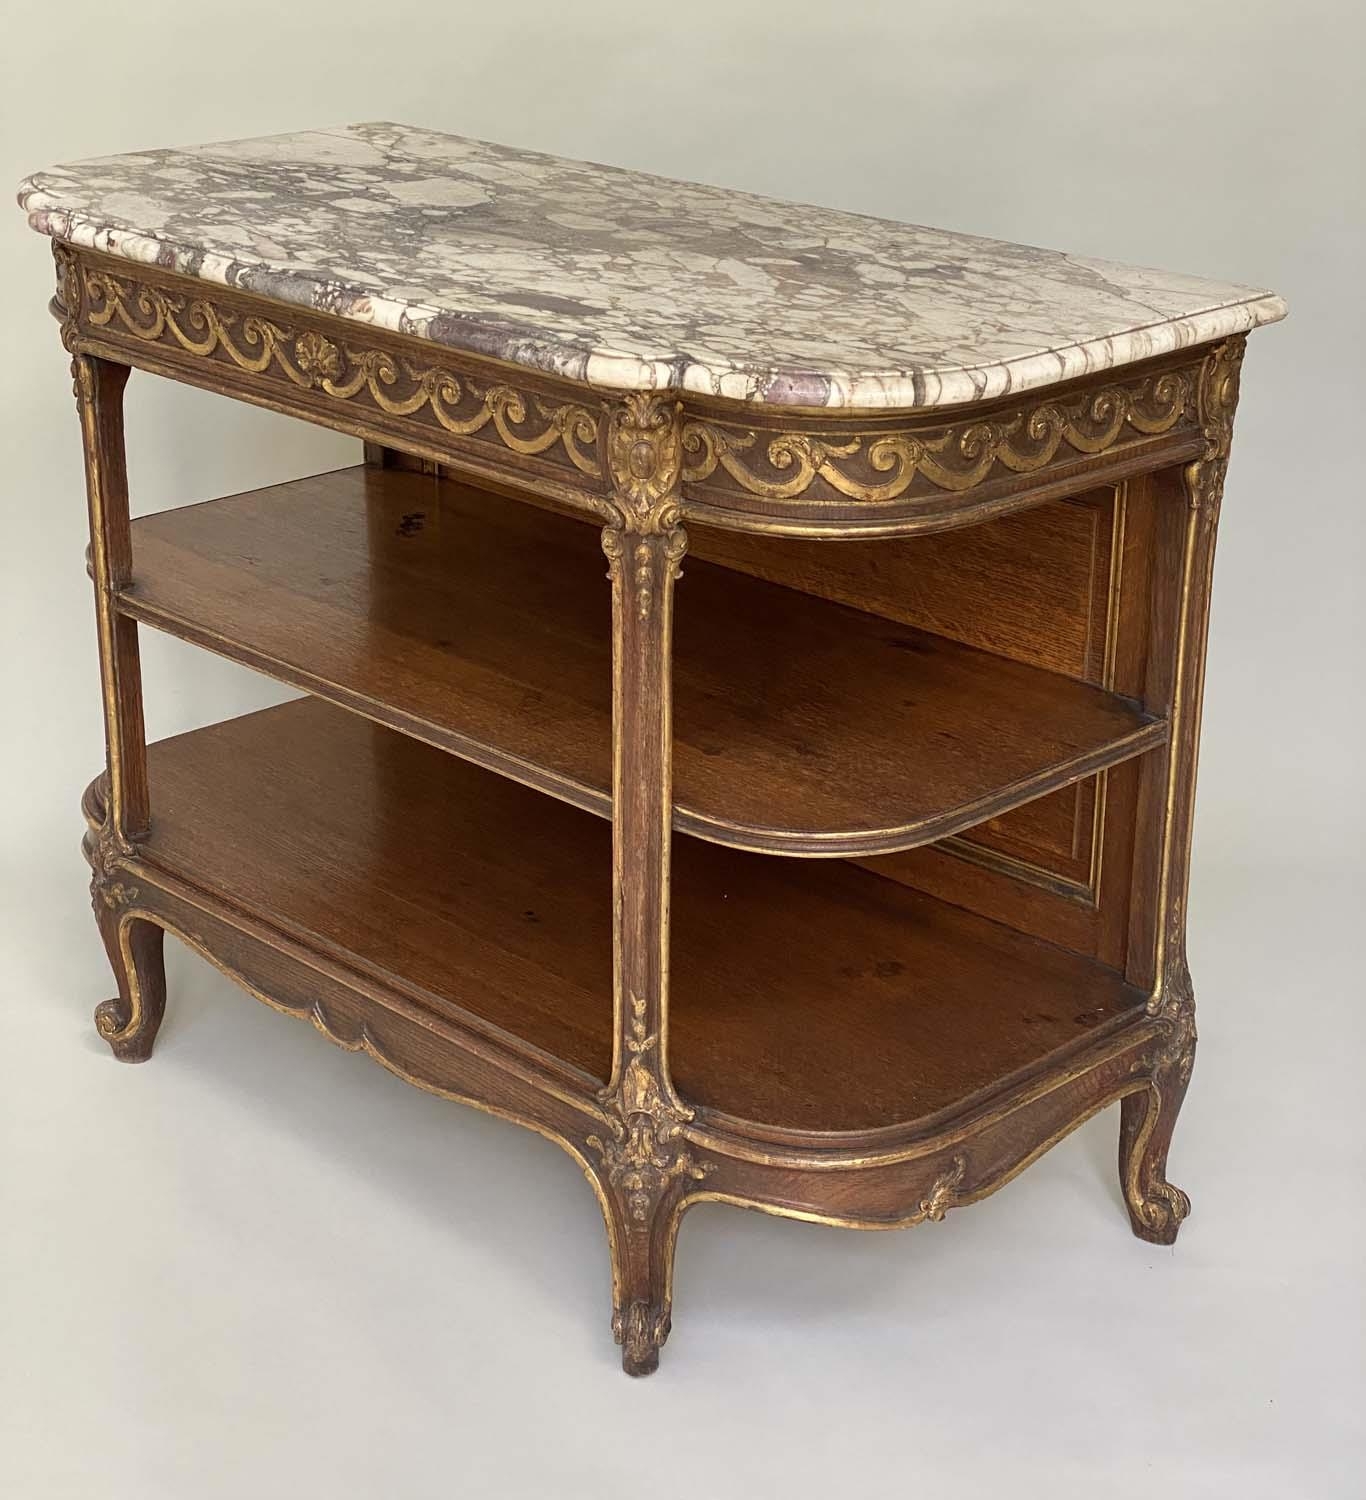 CONSOLE SERVING TABLE, 19th century French carved giltwood and rosewood wood grained with breche - Image 7 of 8